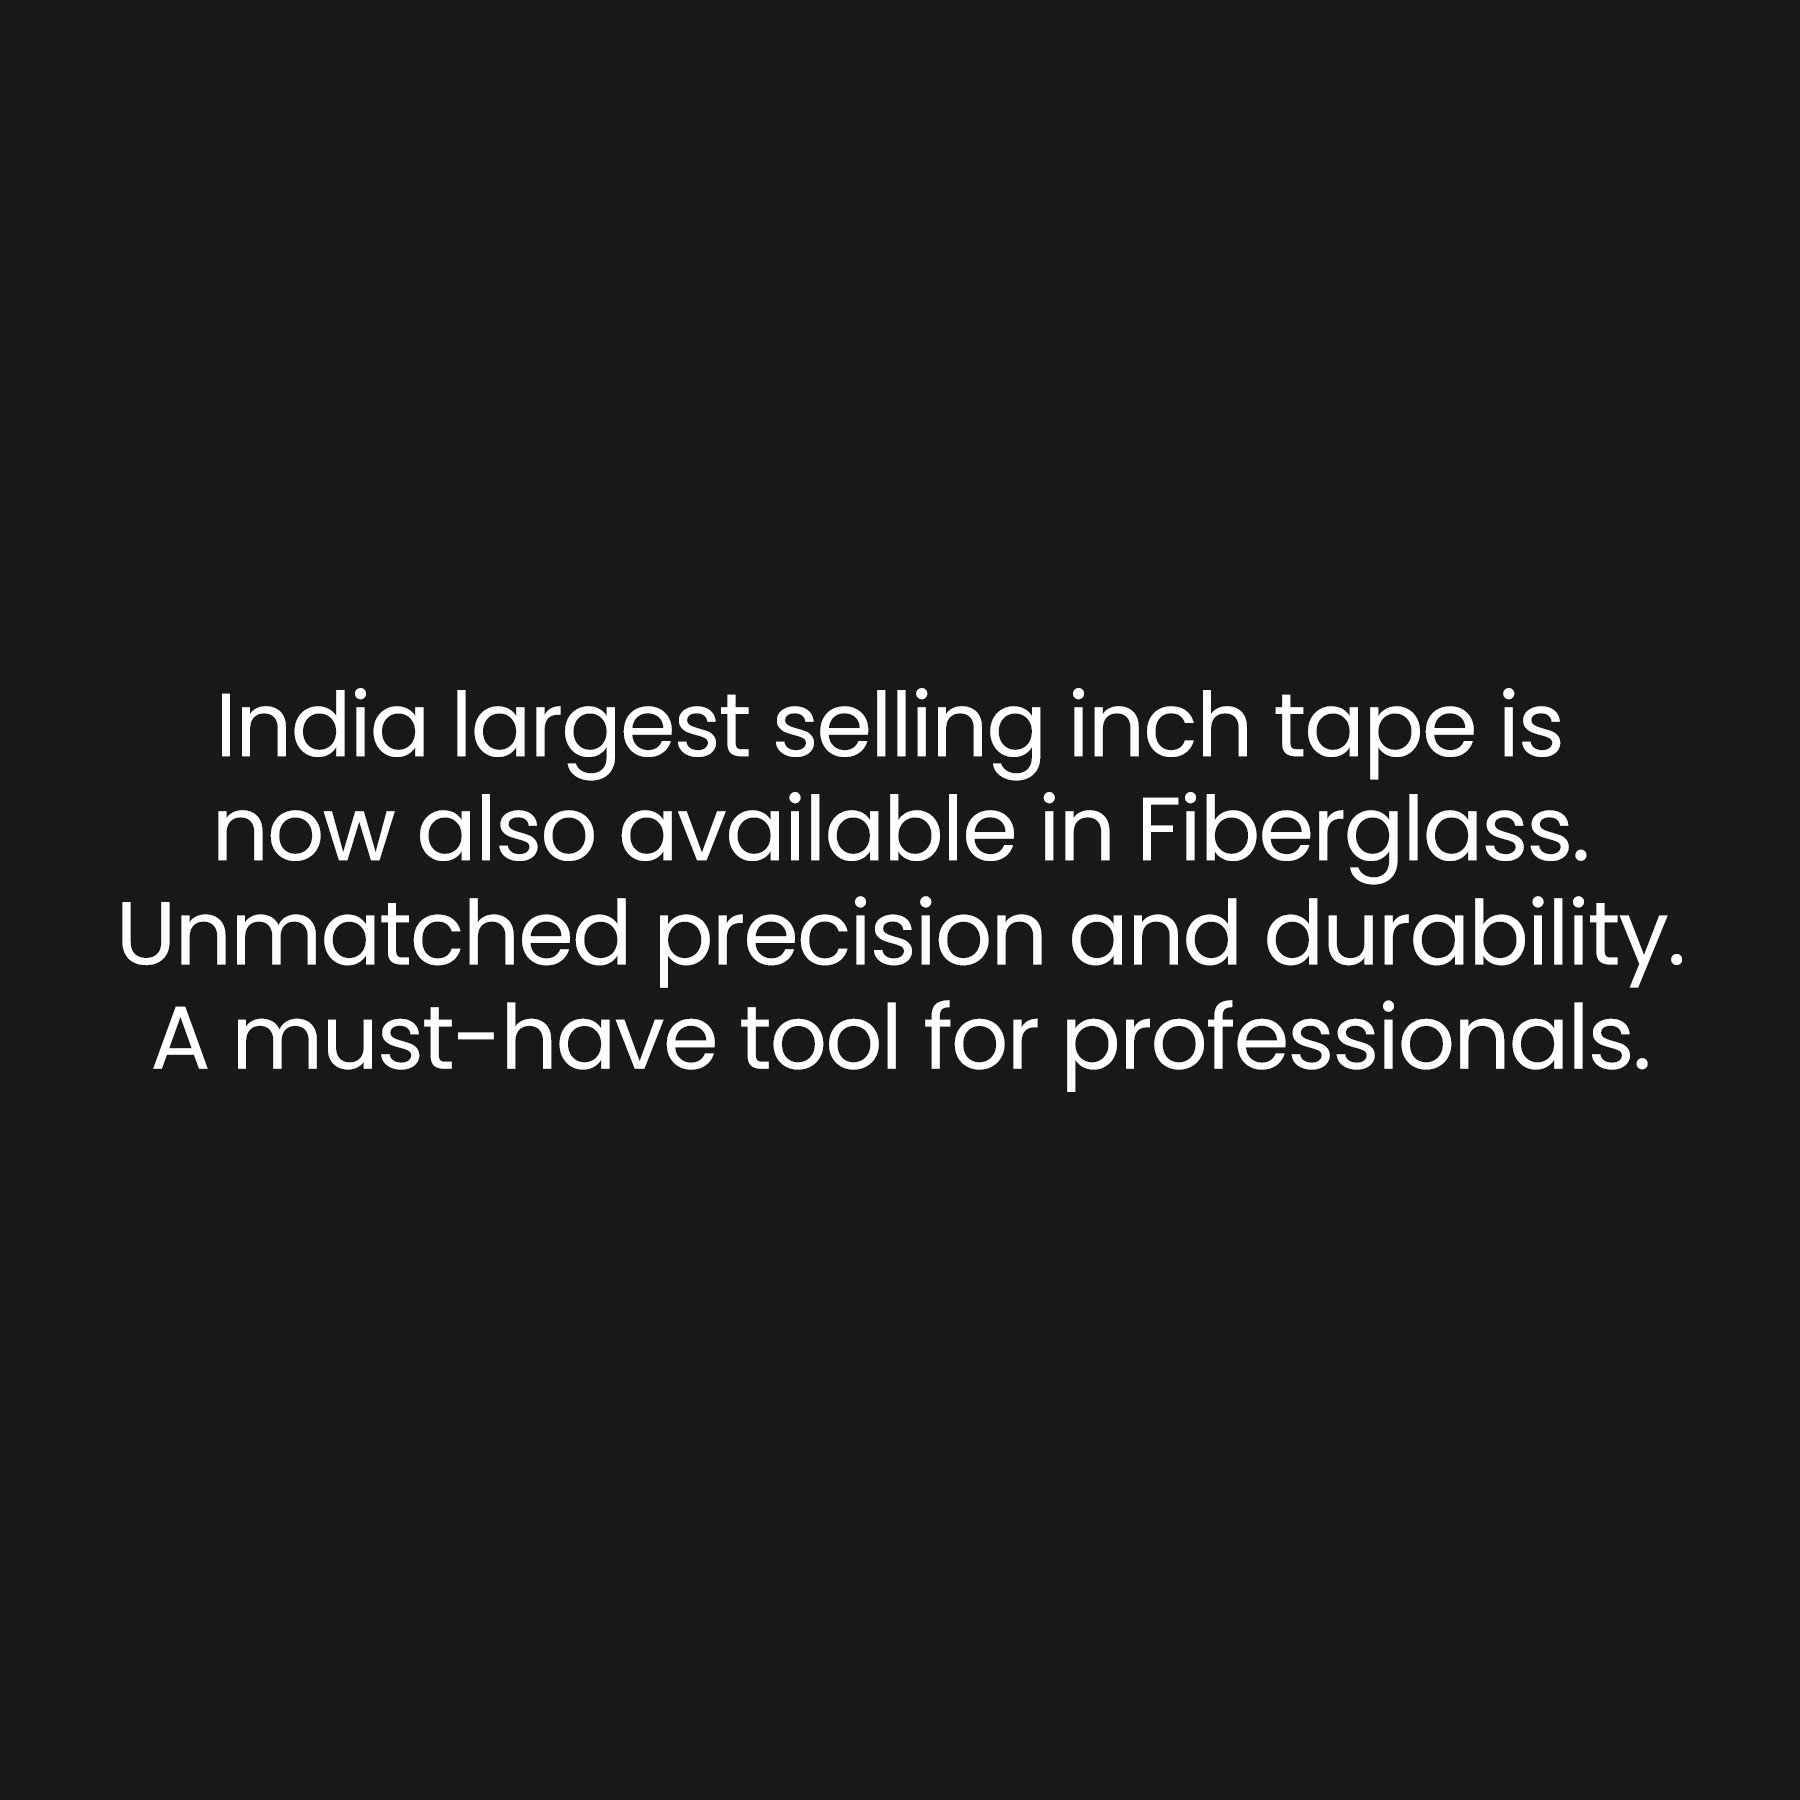 India Largest selling inch tape is now also available in Fiberglass. Unmtached precision and durabilit. A must have tool for professionals